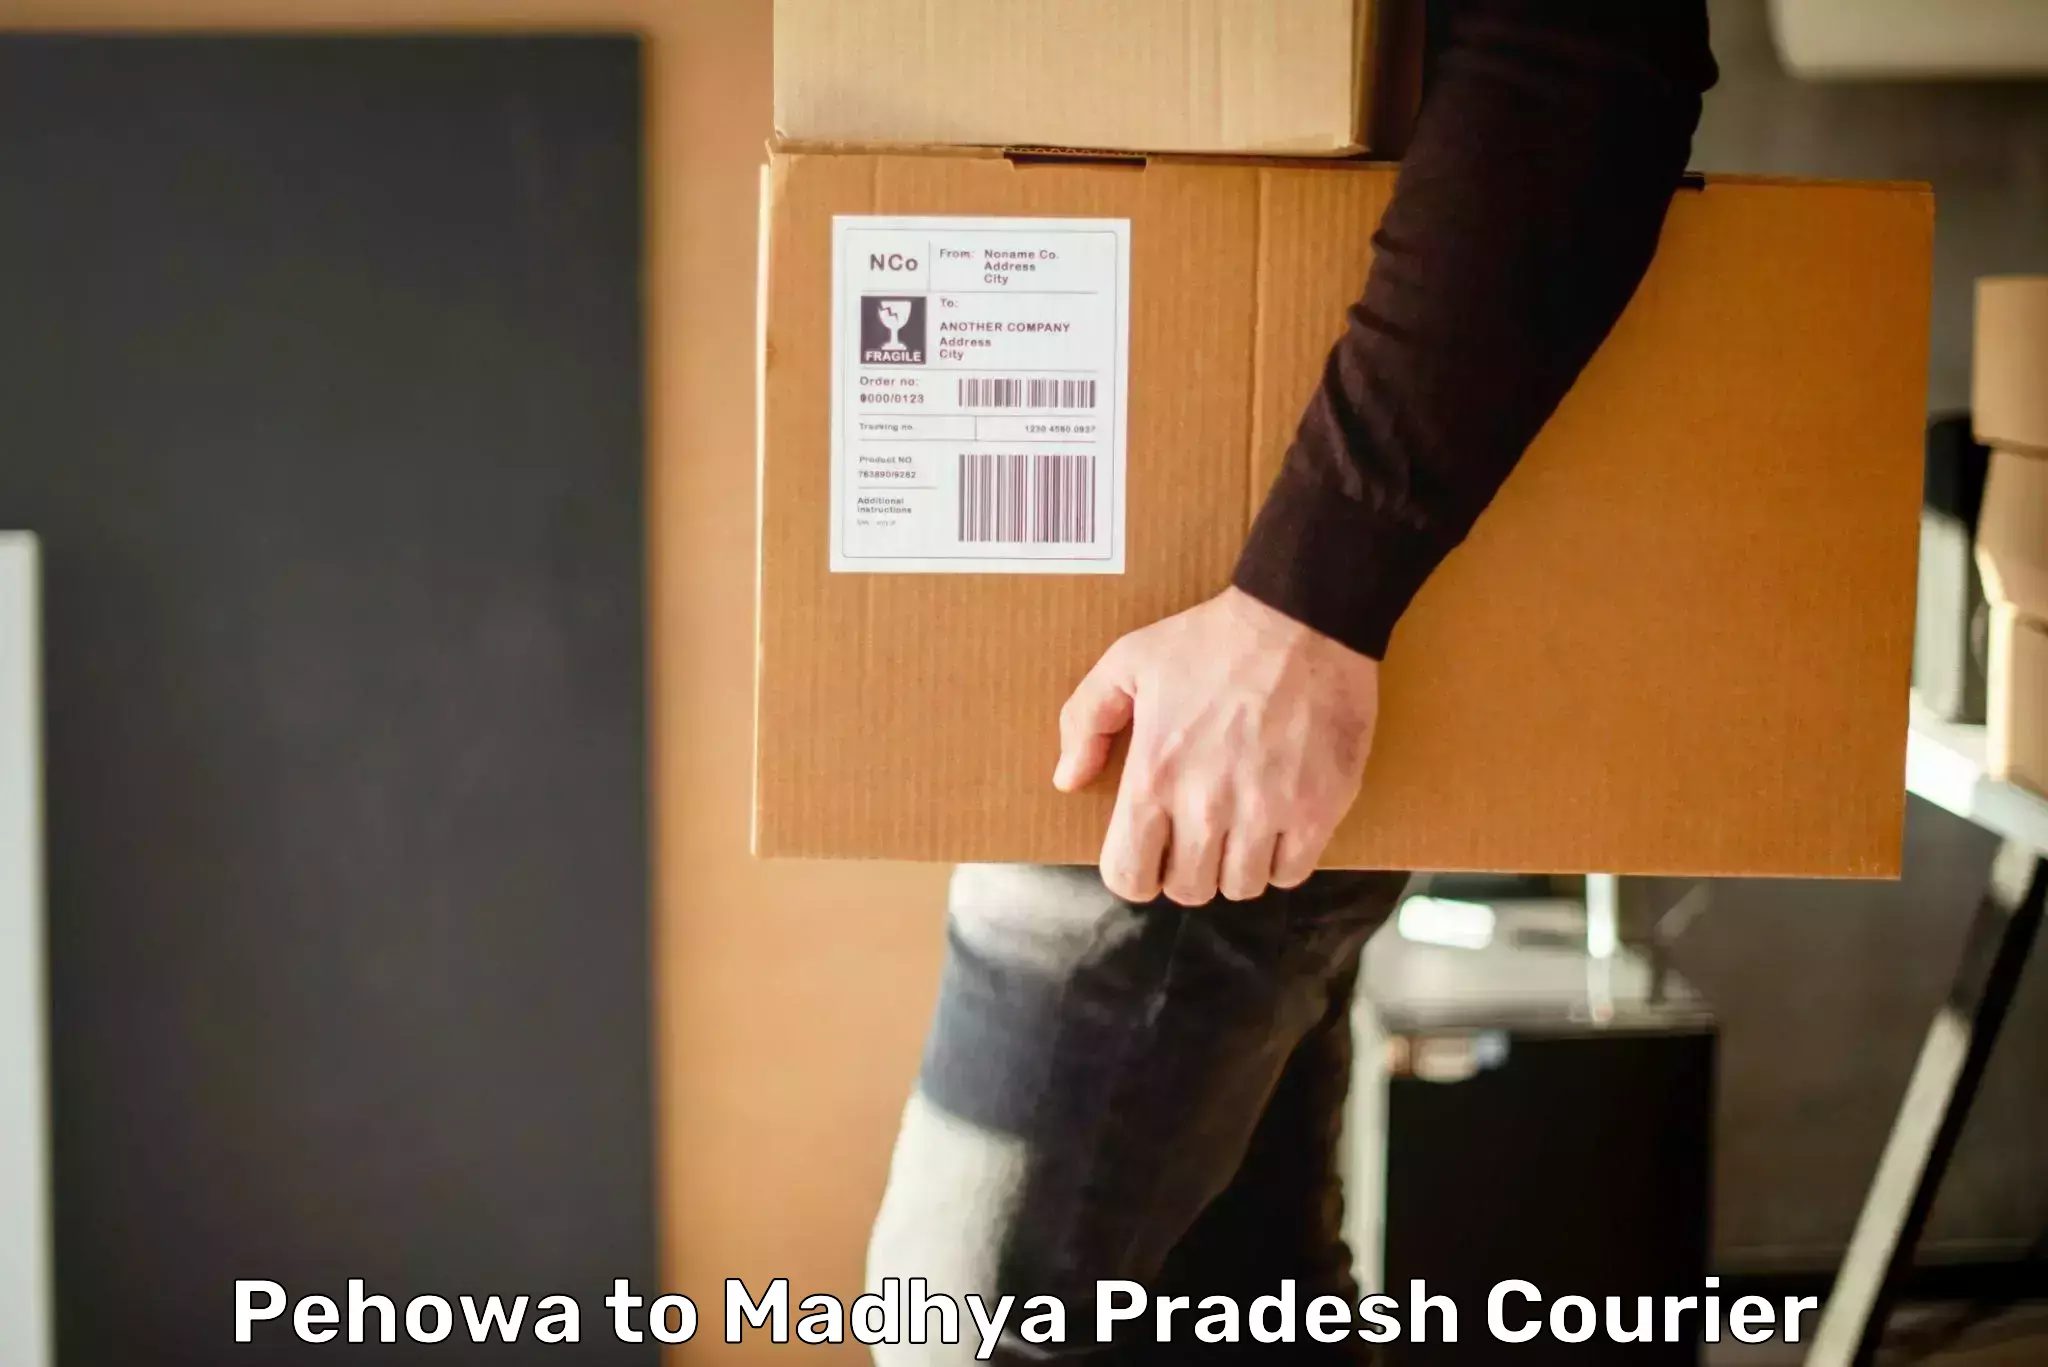 Courier service innovation Pehowa to Chanderi